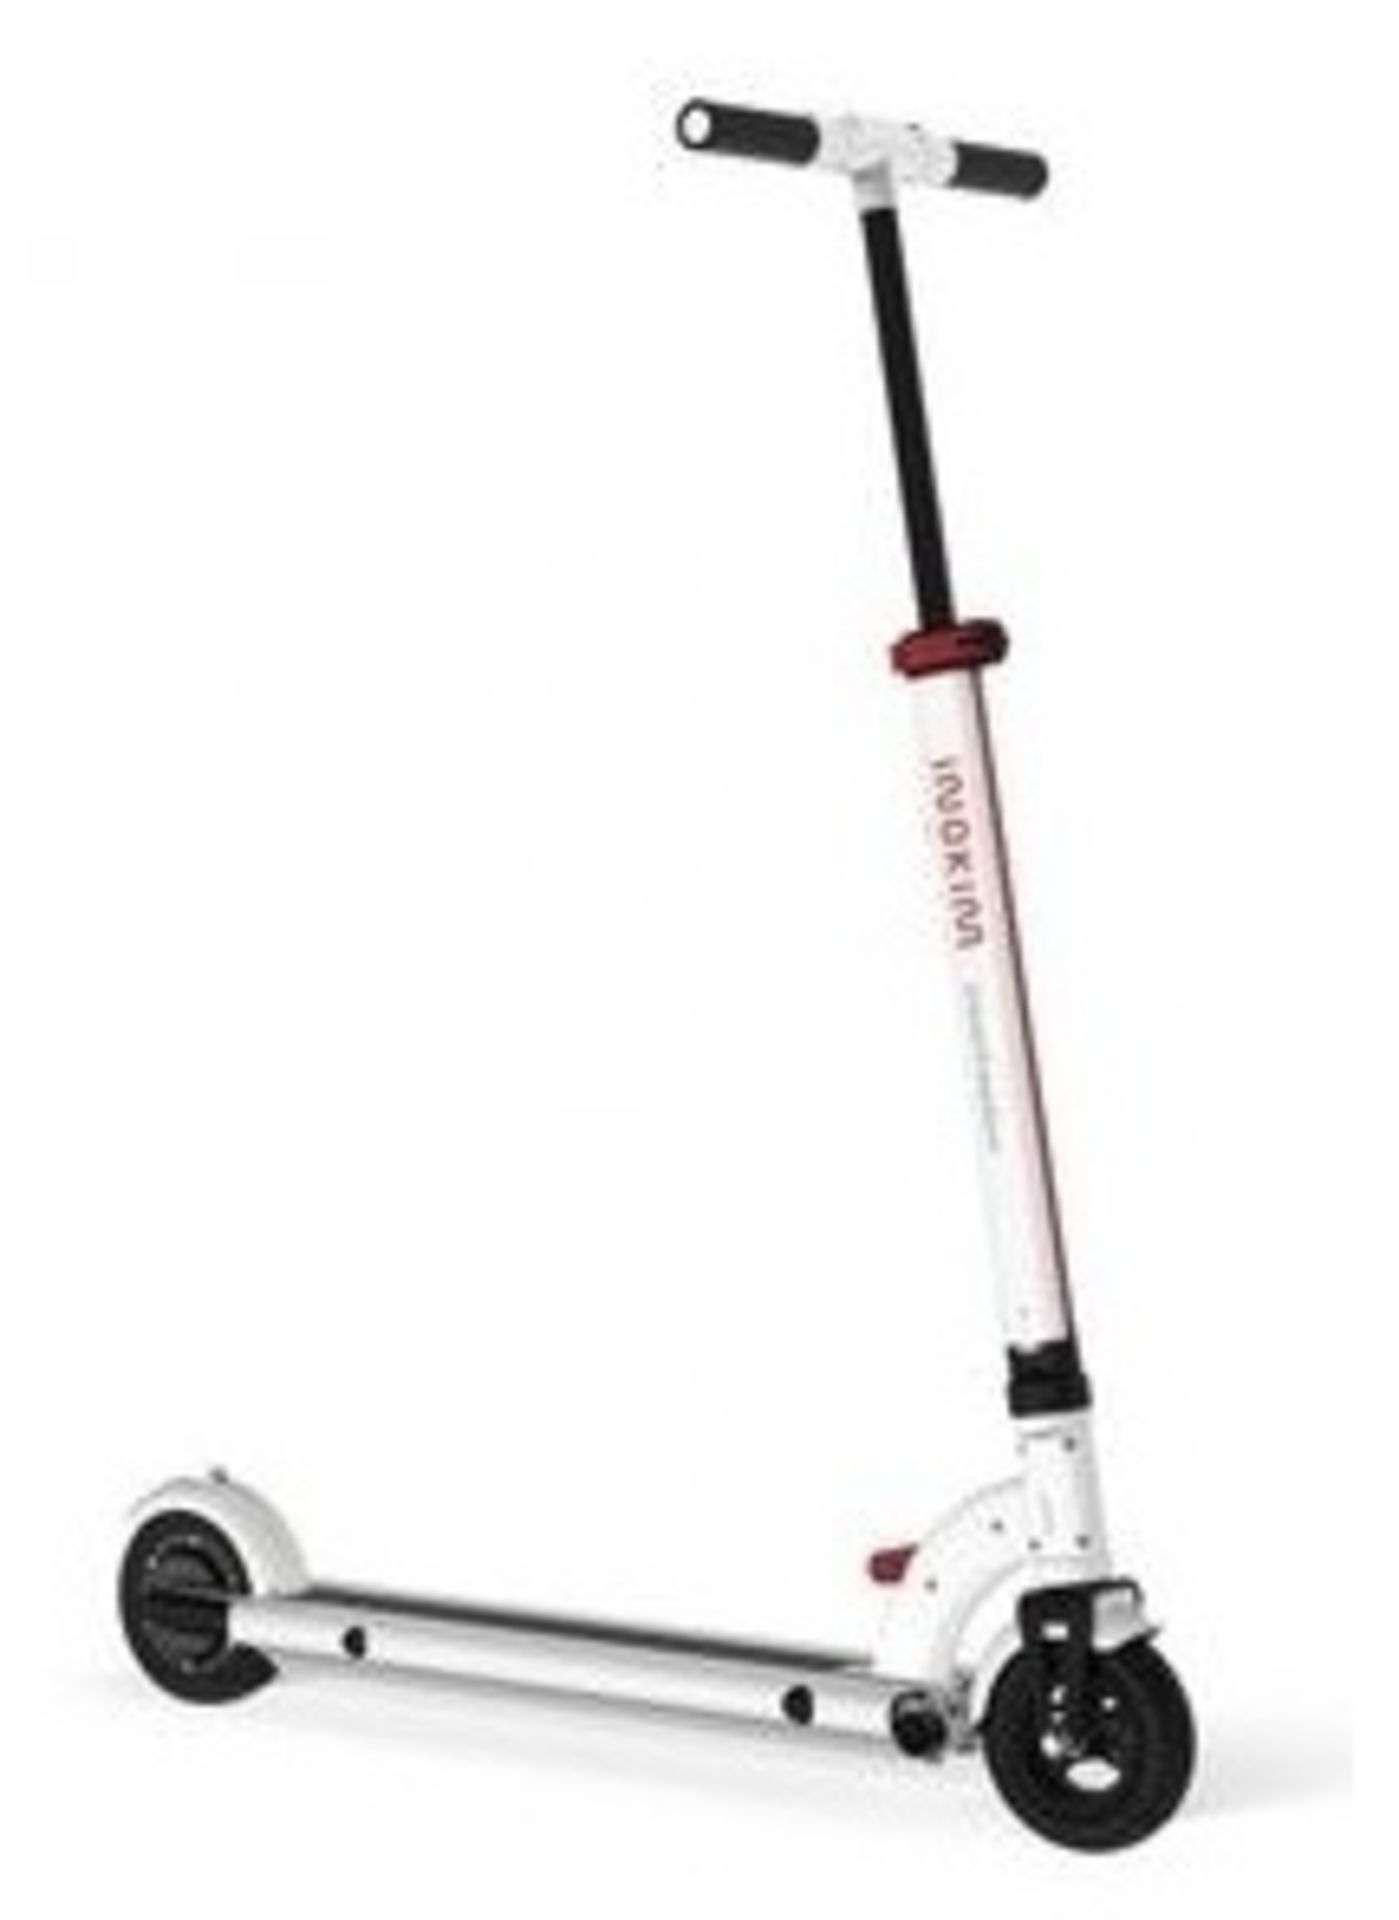 BRAND NEW INOKIM MINI FORCE BLACK 1'SELECTRIC SCOOTER (BLACK) RRP £559 - Image 4 of 4